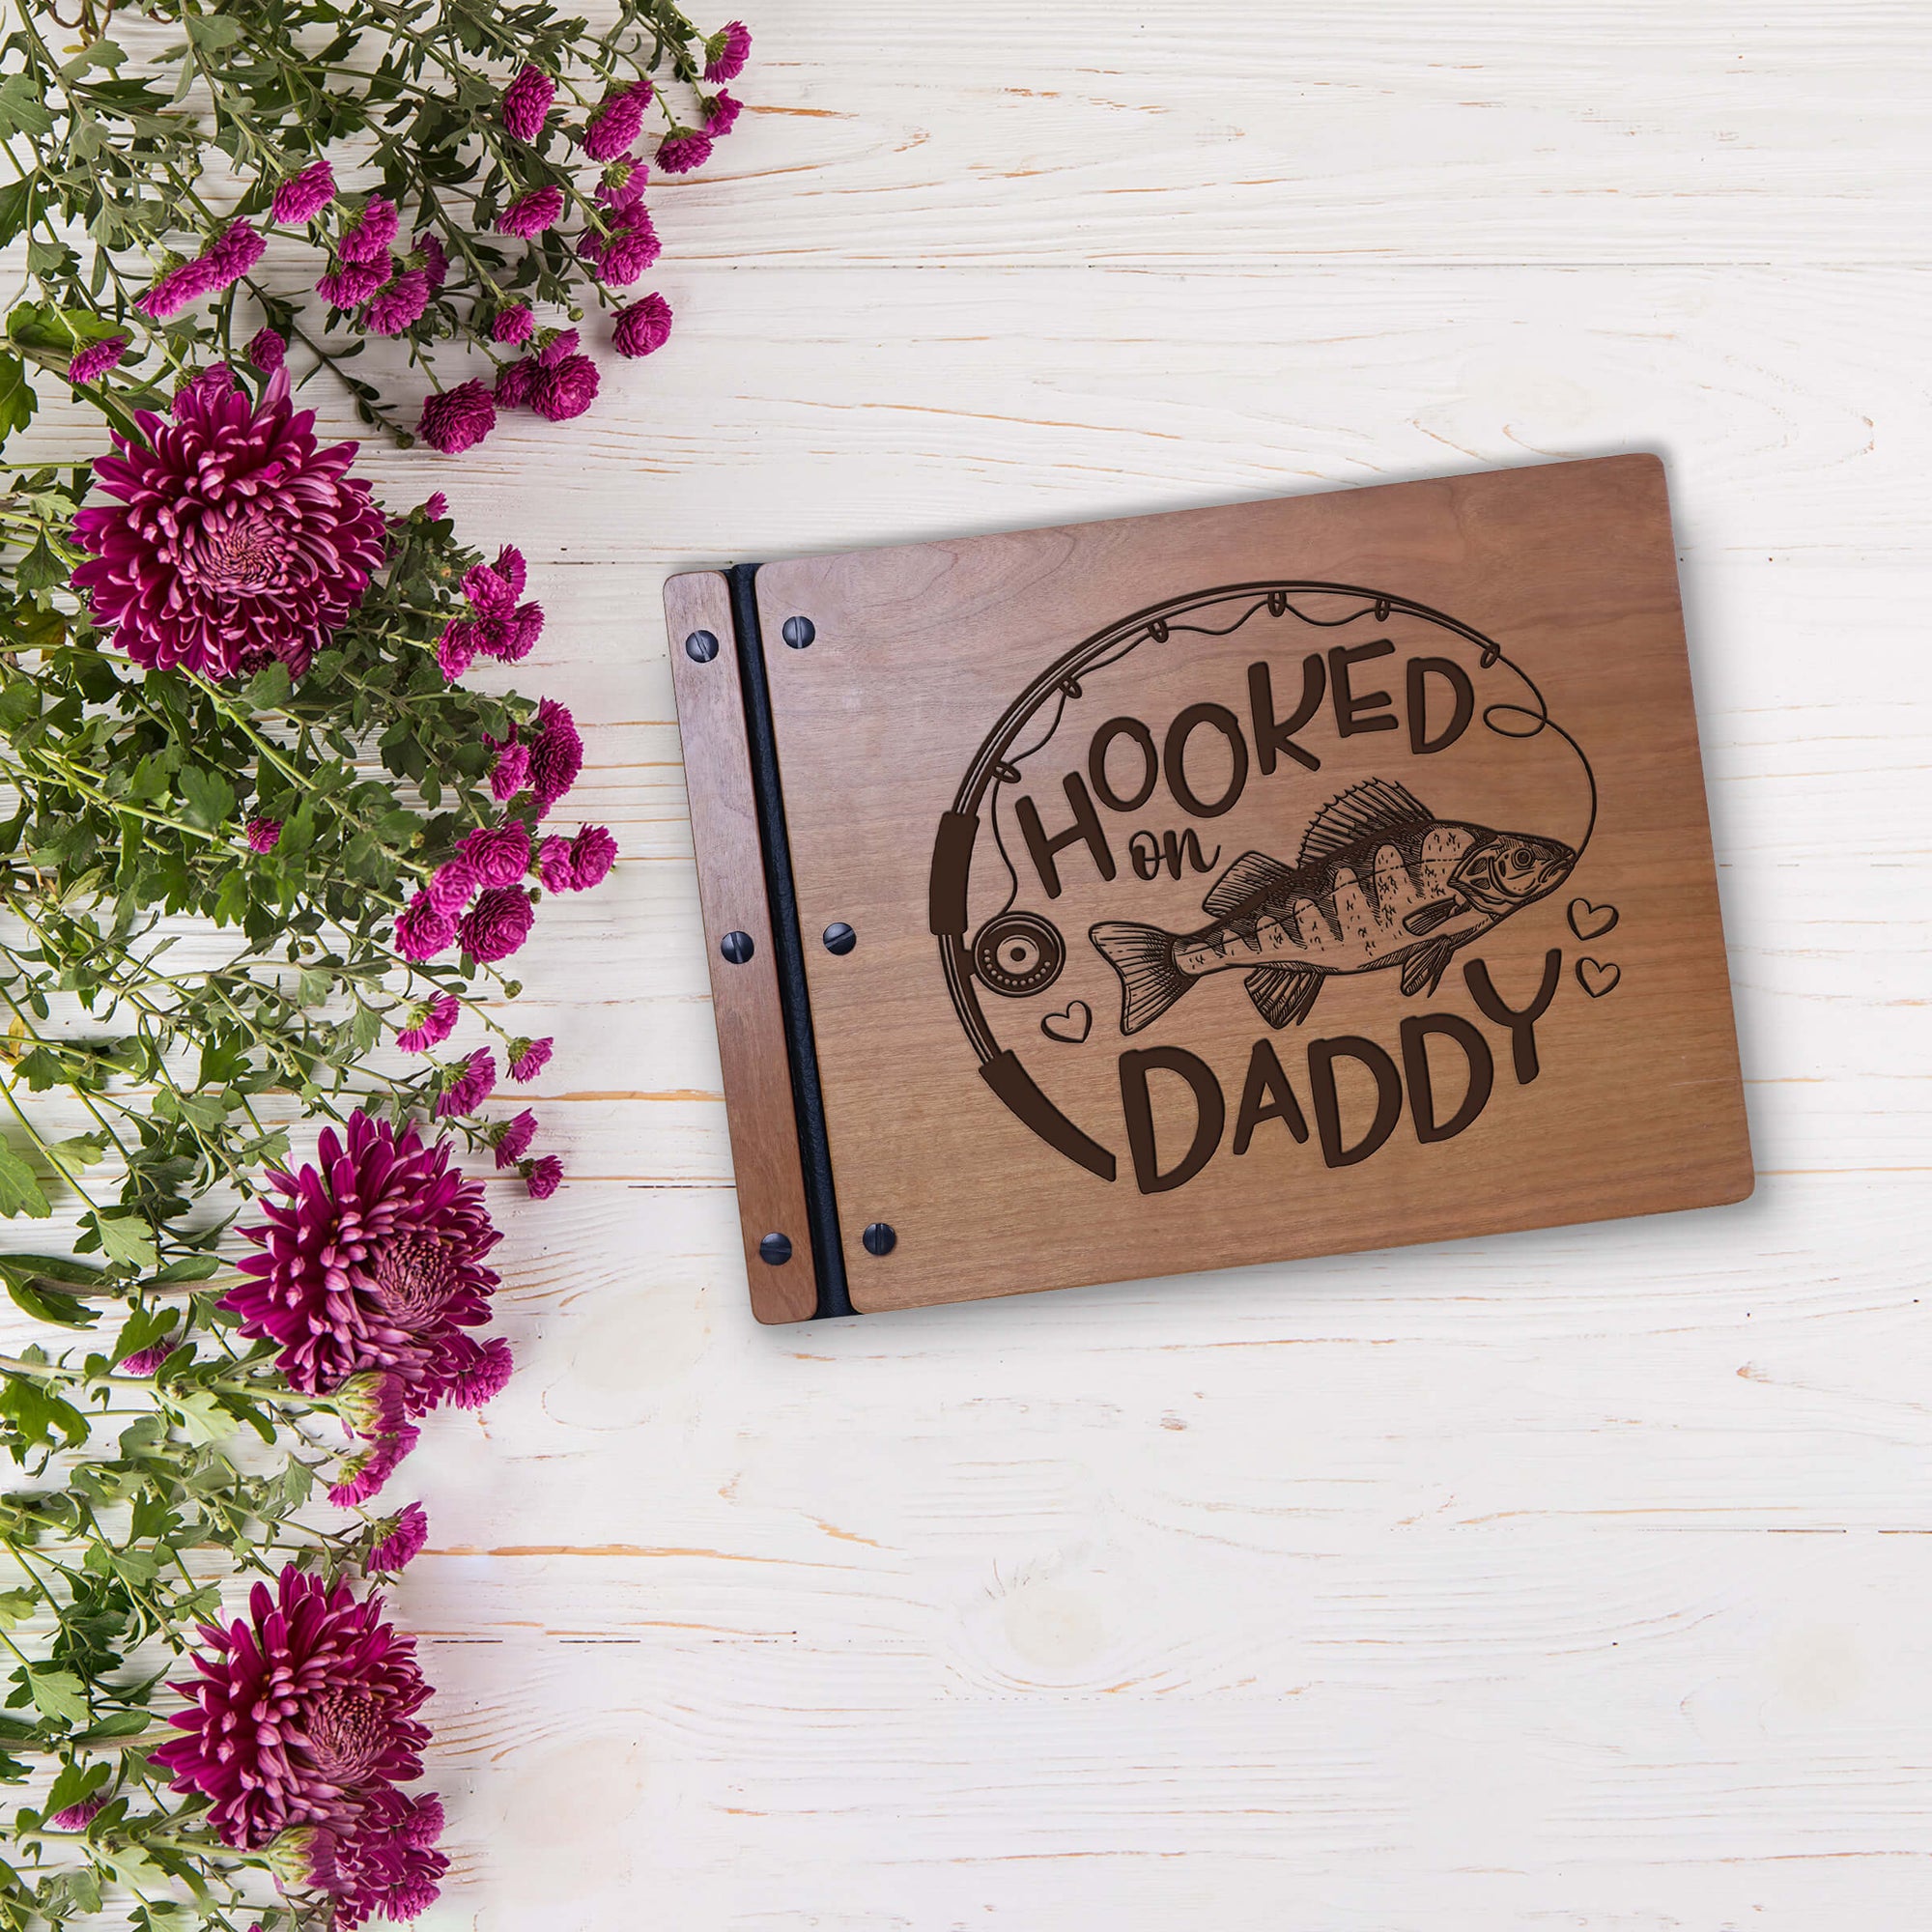 Wooden Memorial Large Guestbook with Fisherman Verse for Funeral Service - Hooked On Daddy